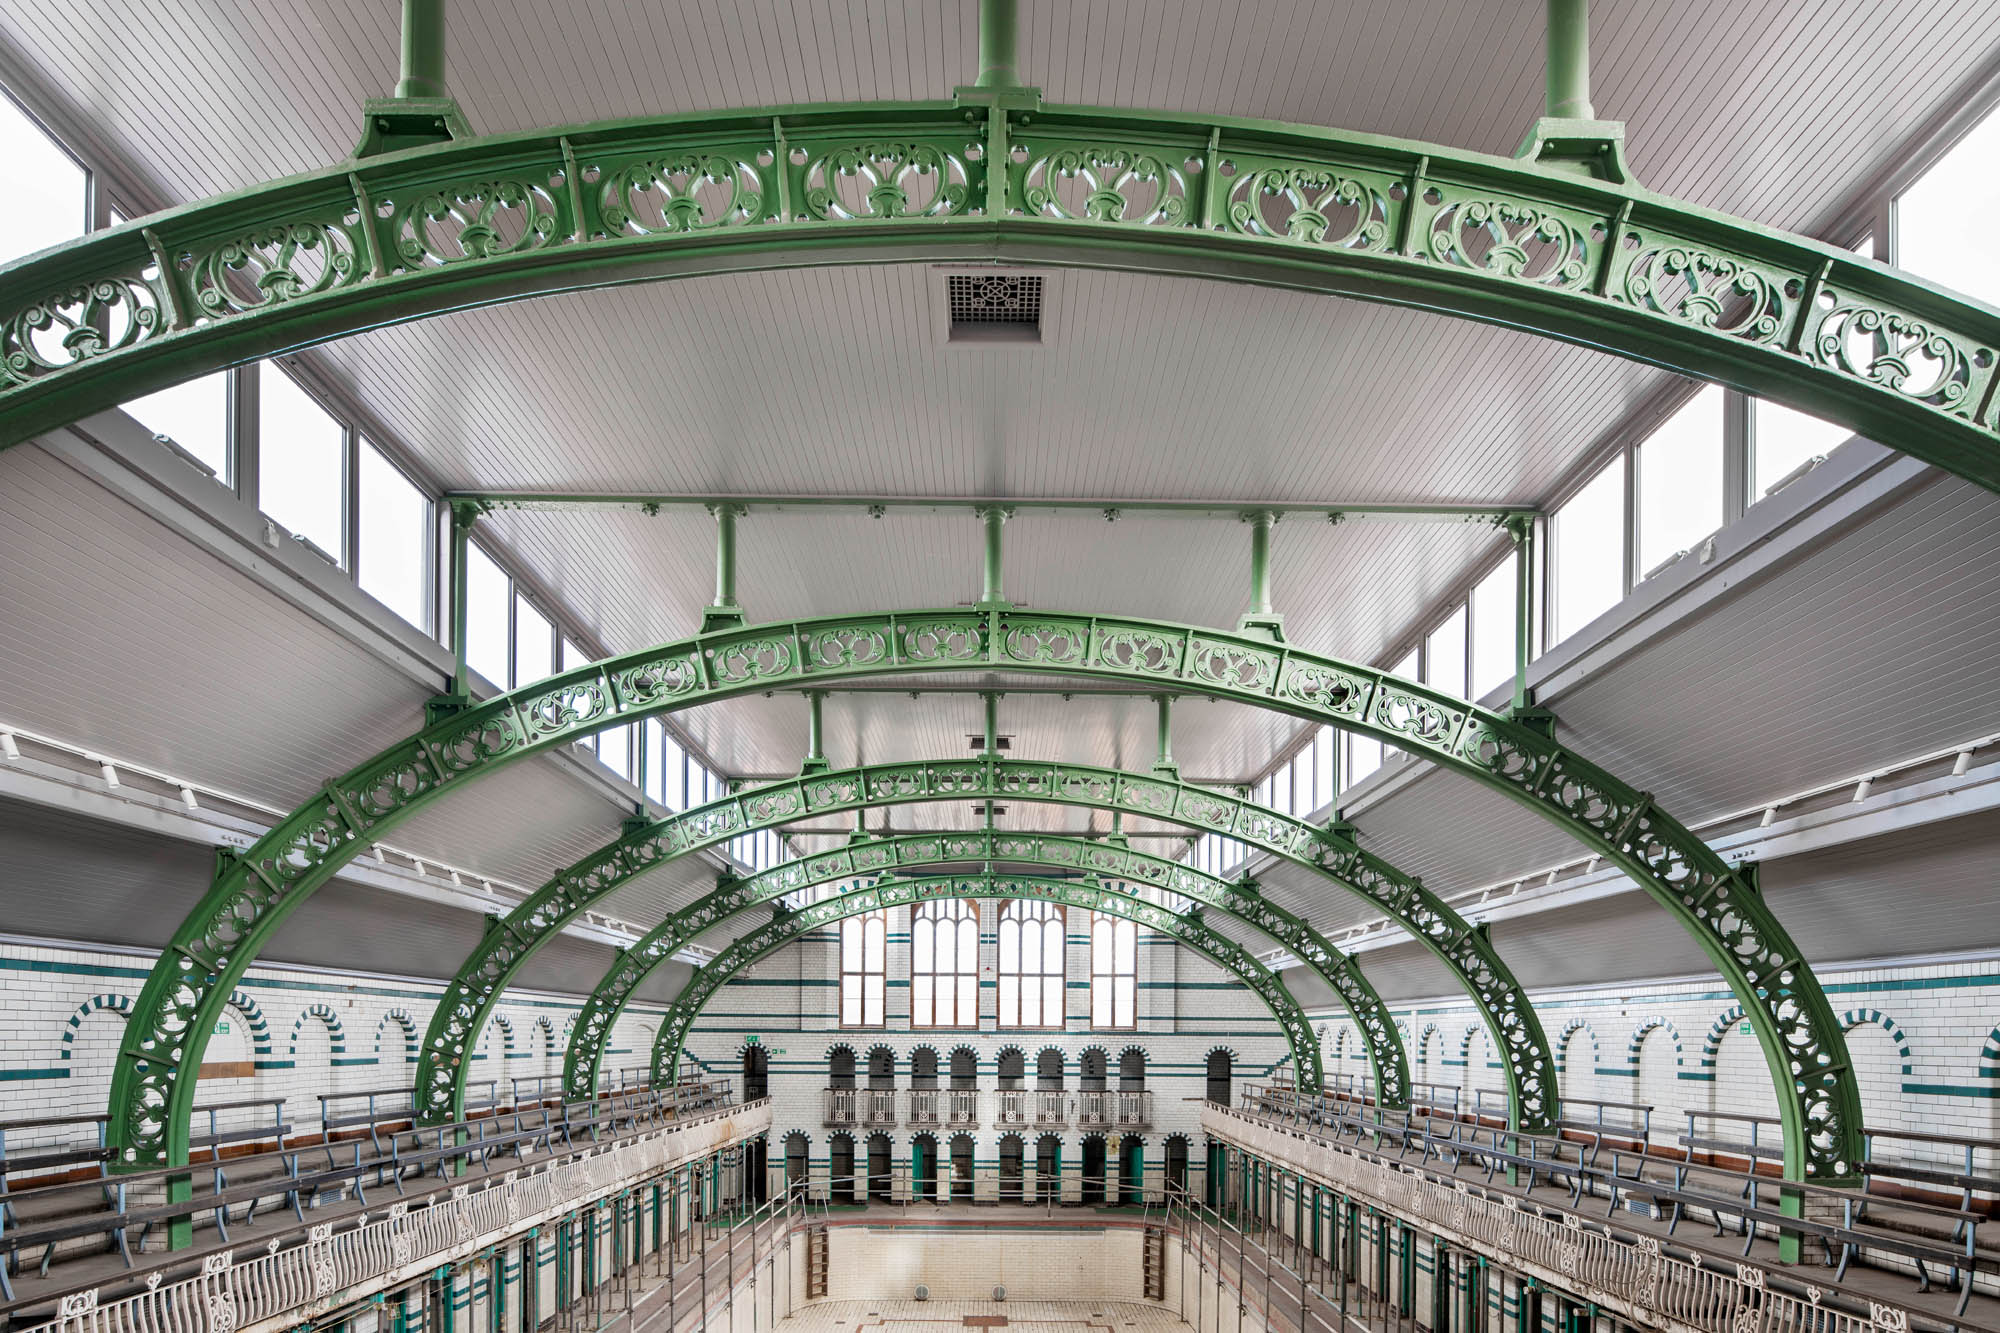 Ornate iron structure inside the Gala pool